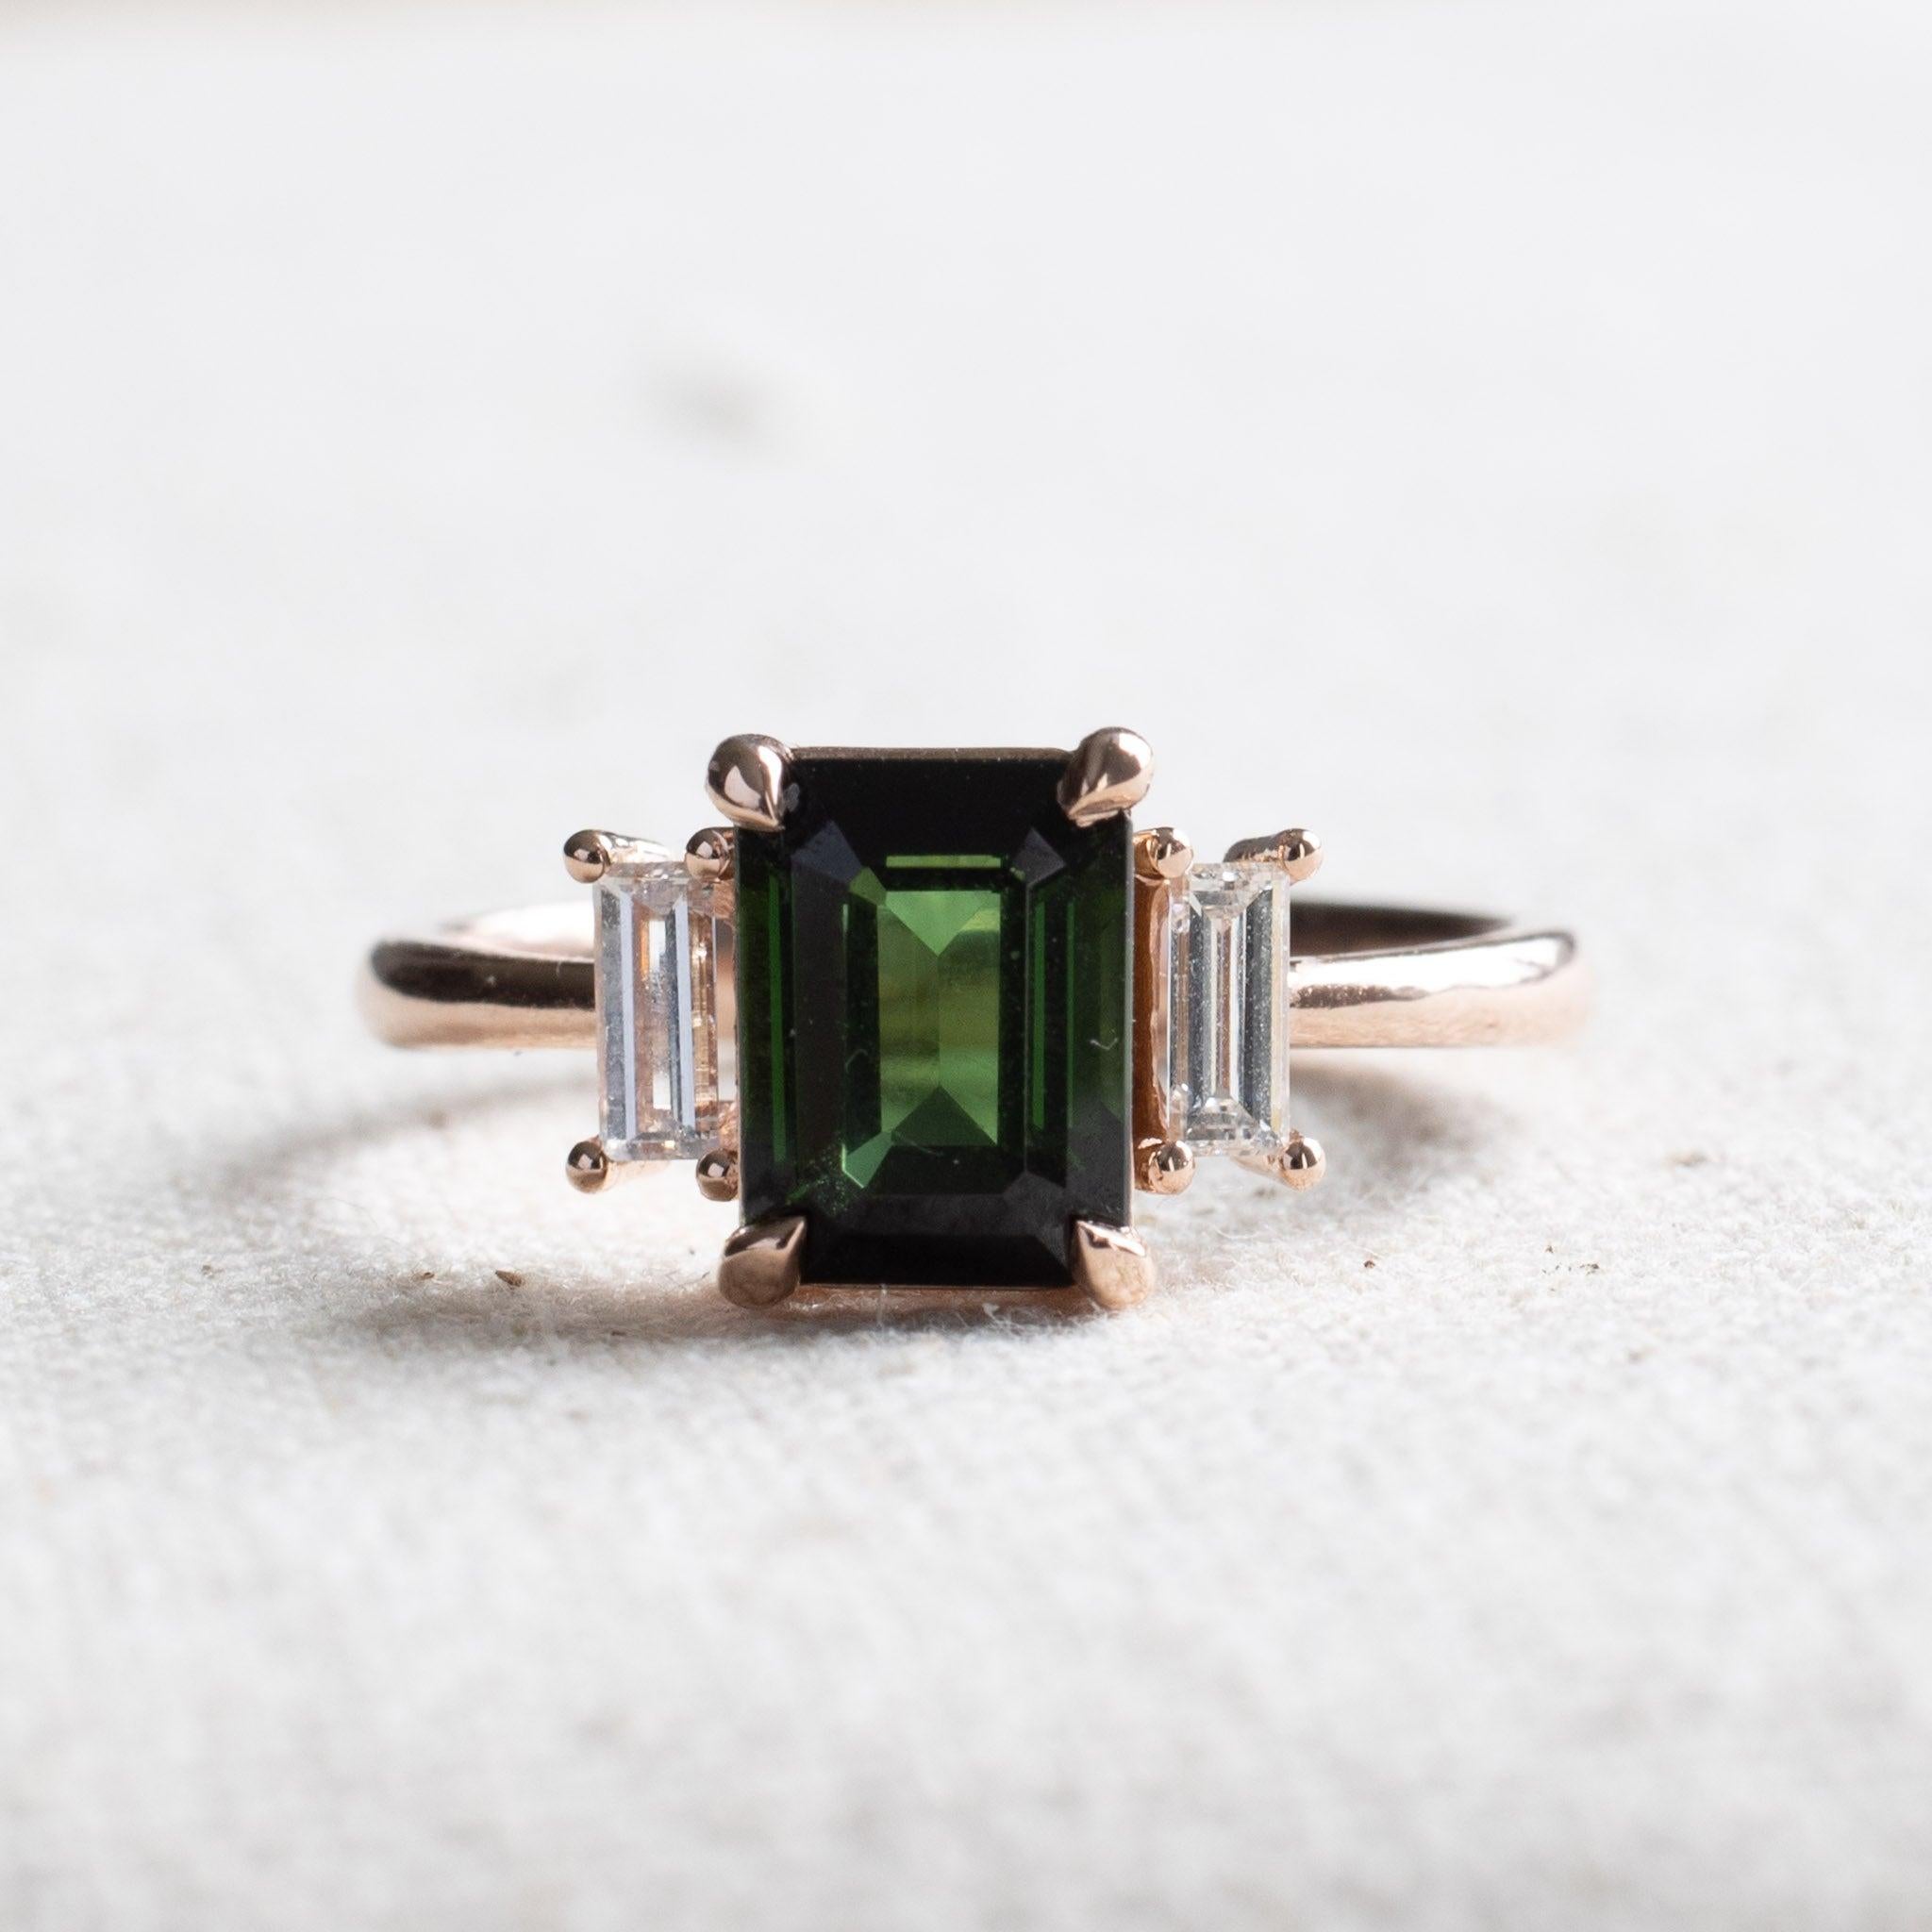 For Sale:  Green Tourmaline Emerald Cut Ring with Baguette Diamonds, Three Stone Ring 3